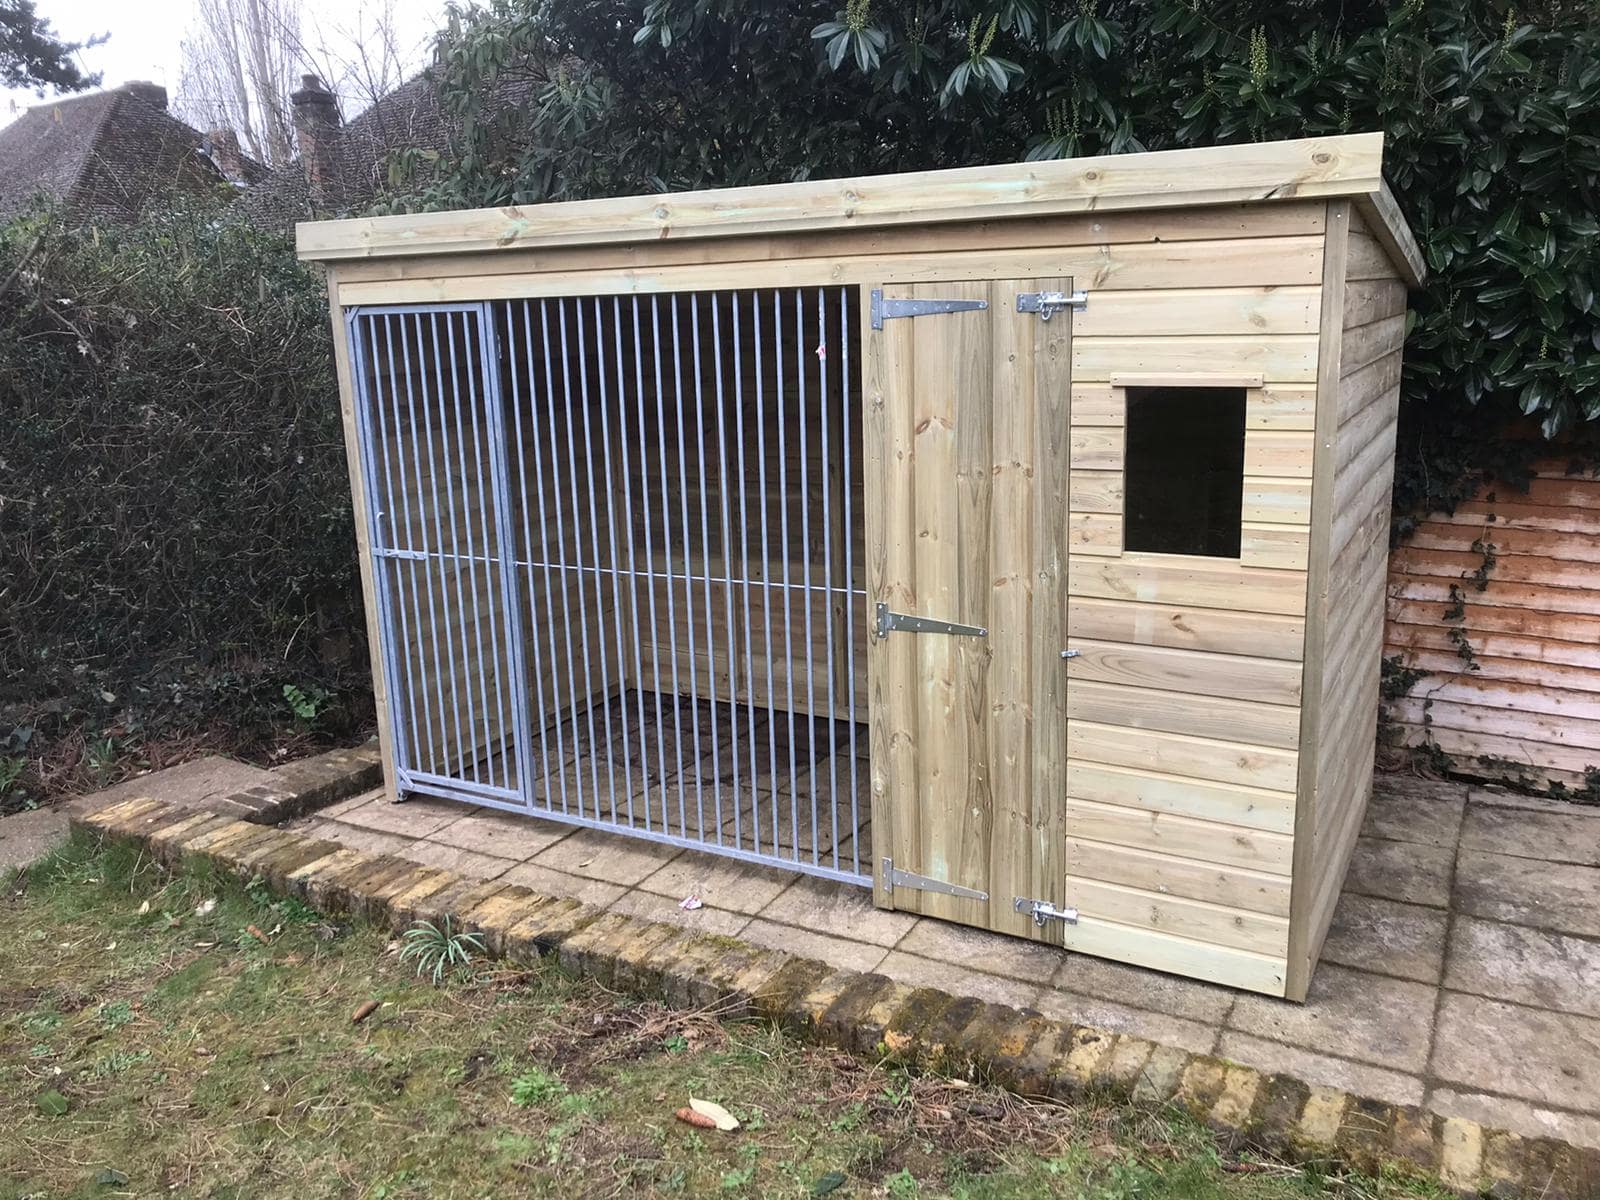 Stapeley Dog Kennel 10'6ft (wide) x 4ft (deep) x 6'6ft (high)